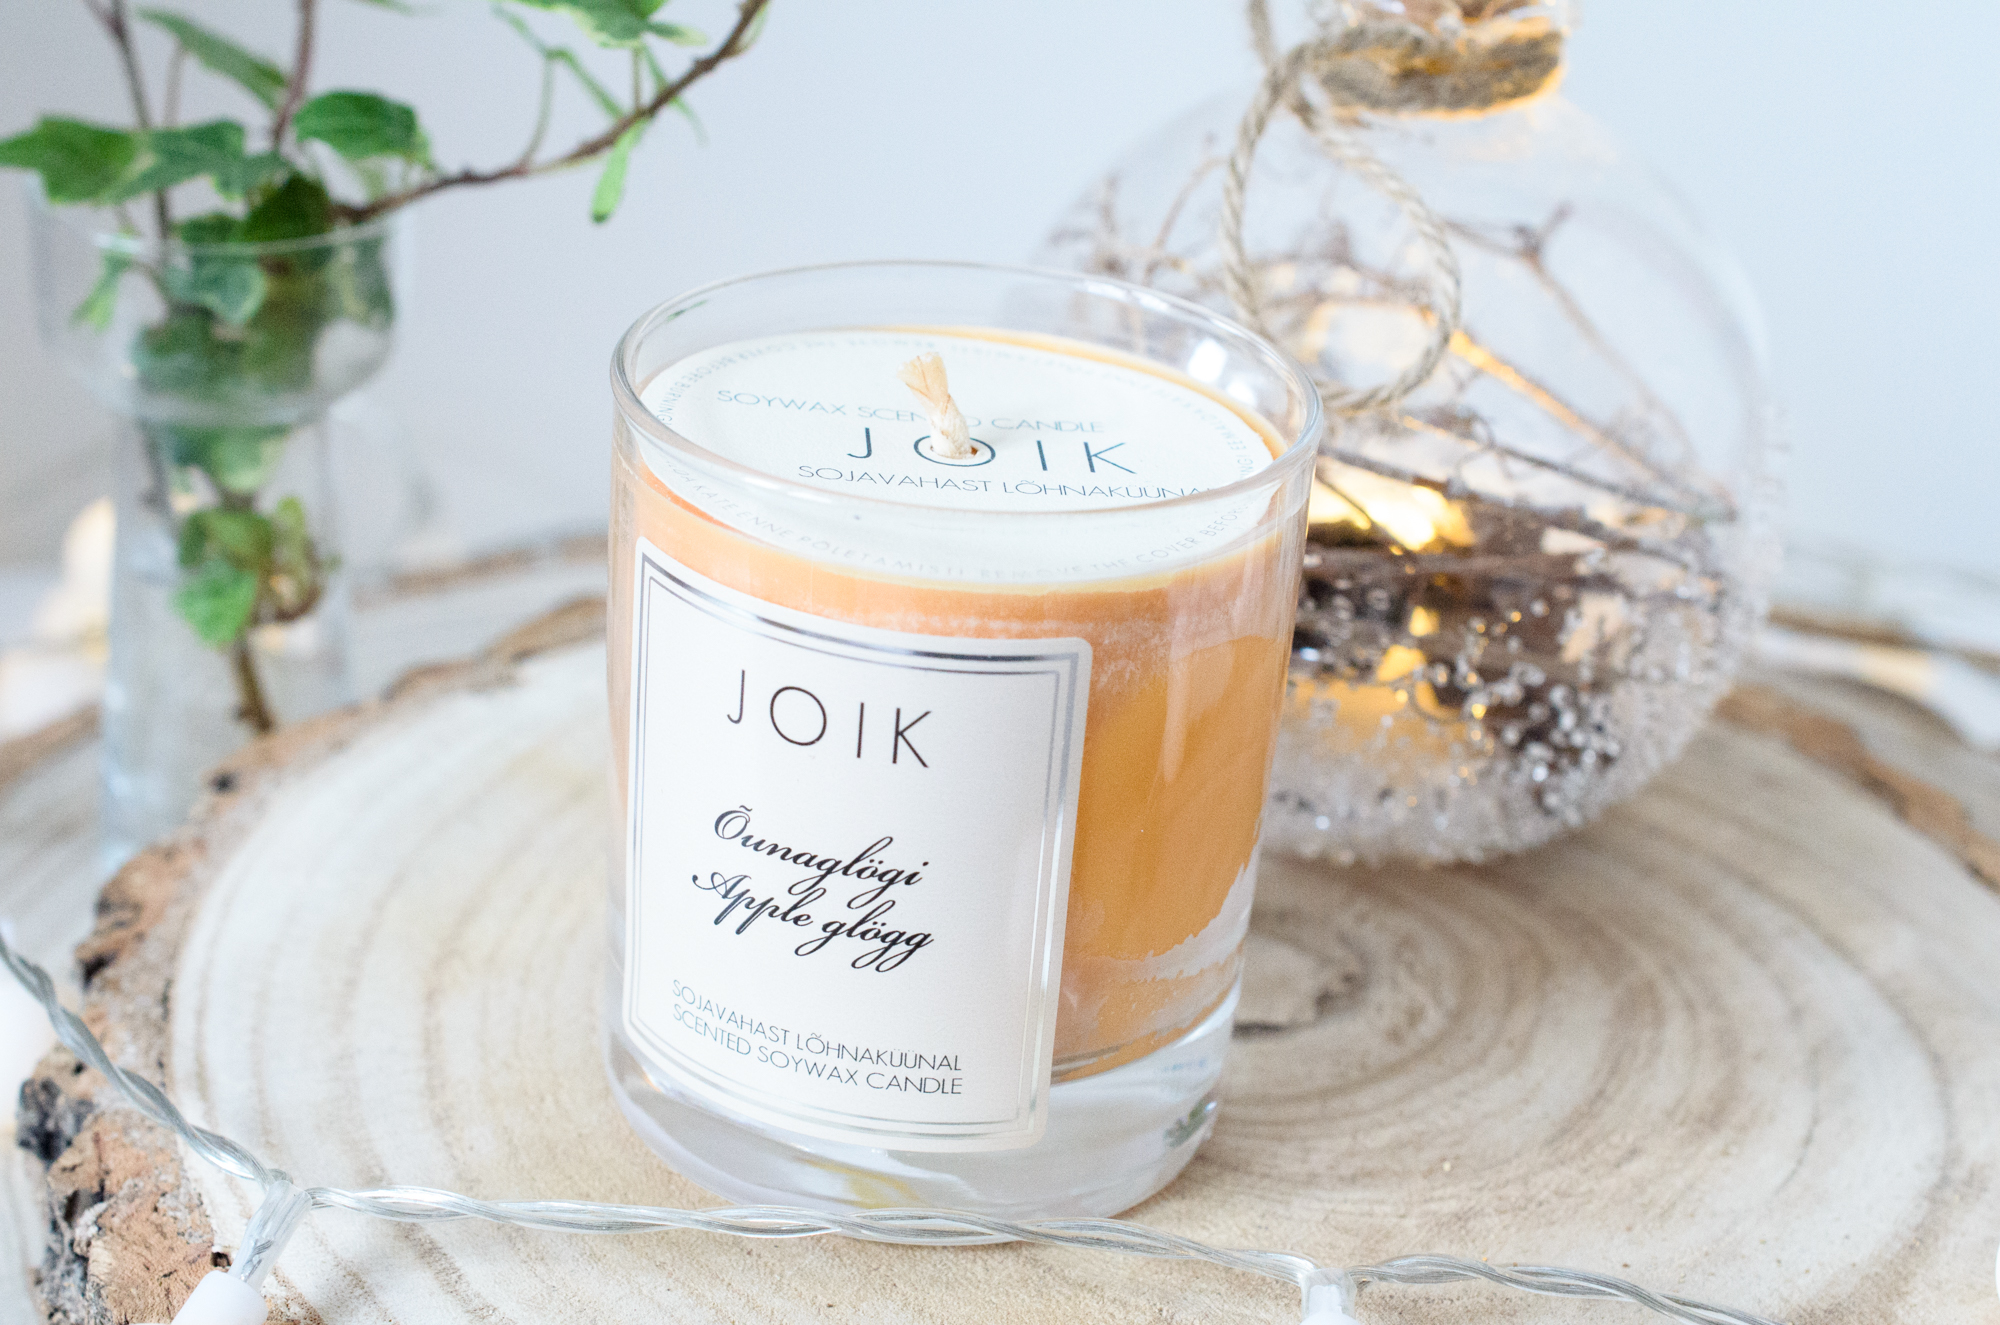 JOIK Apple Glögg Scented Candle